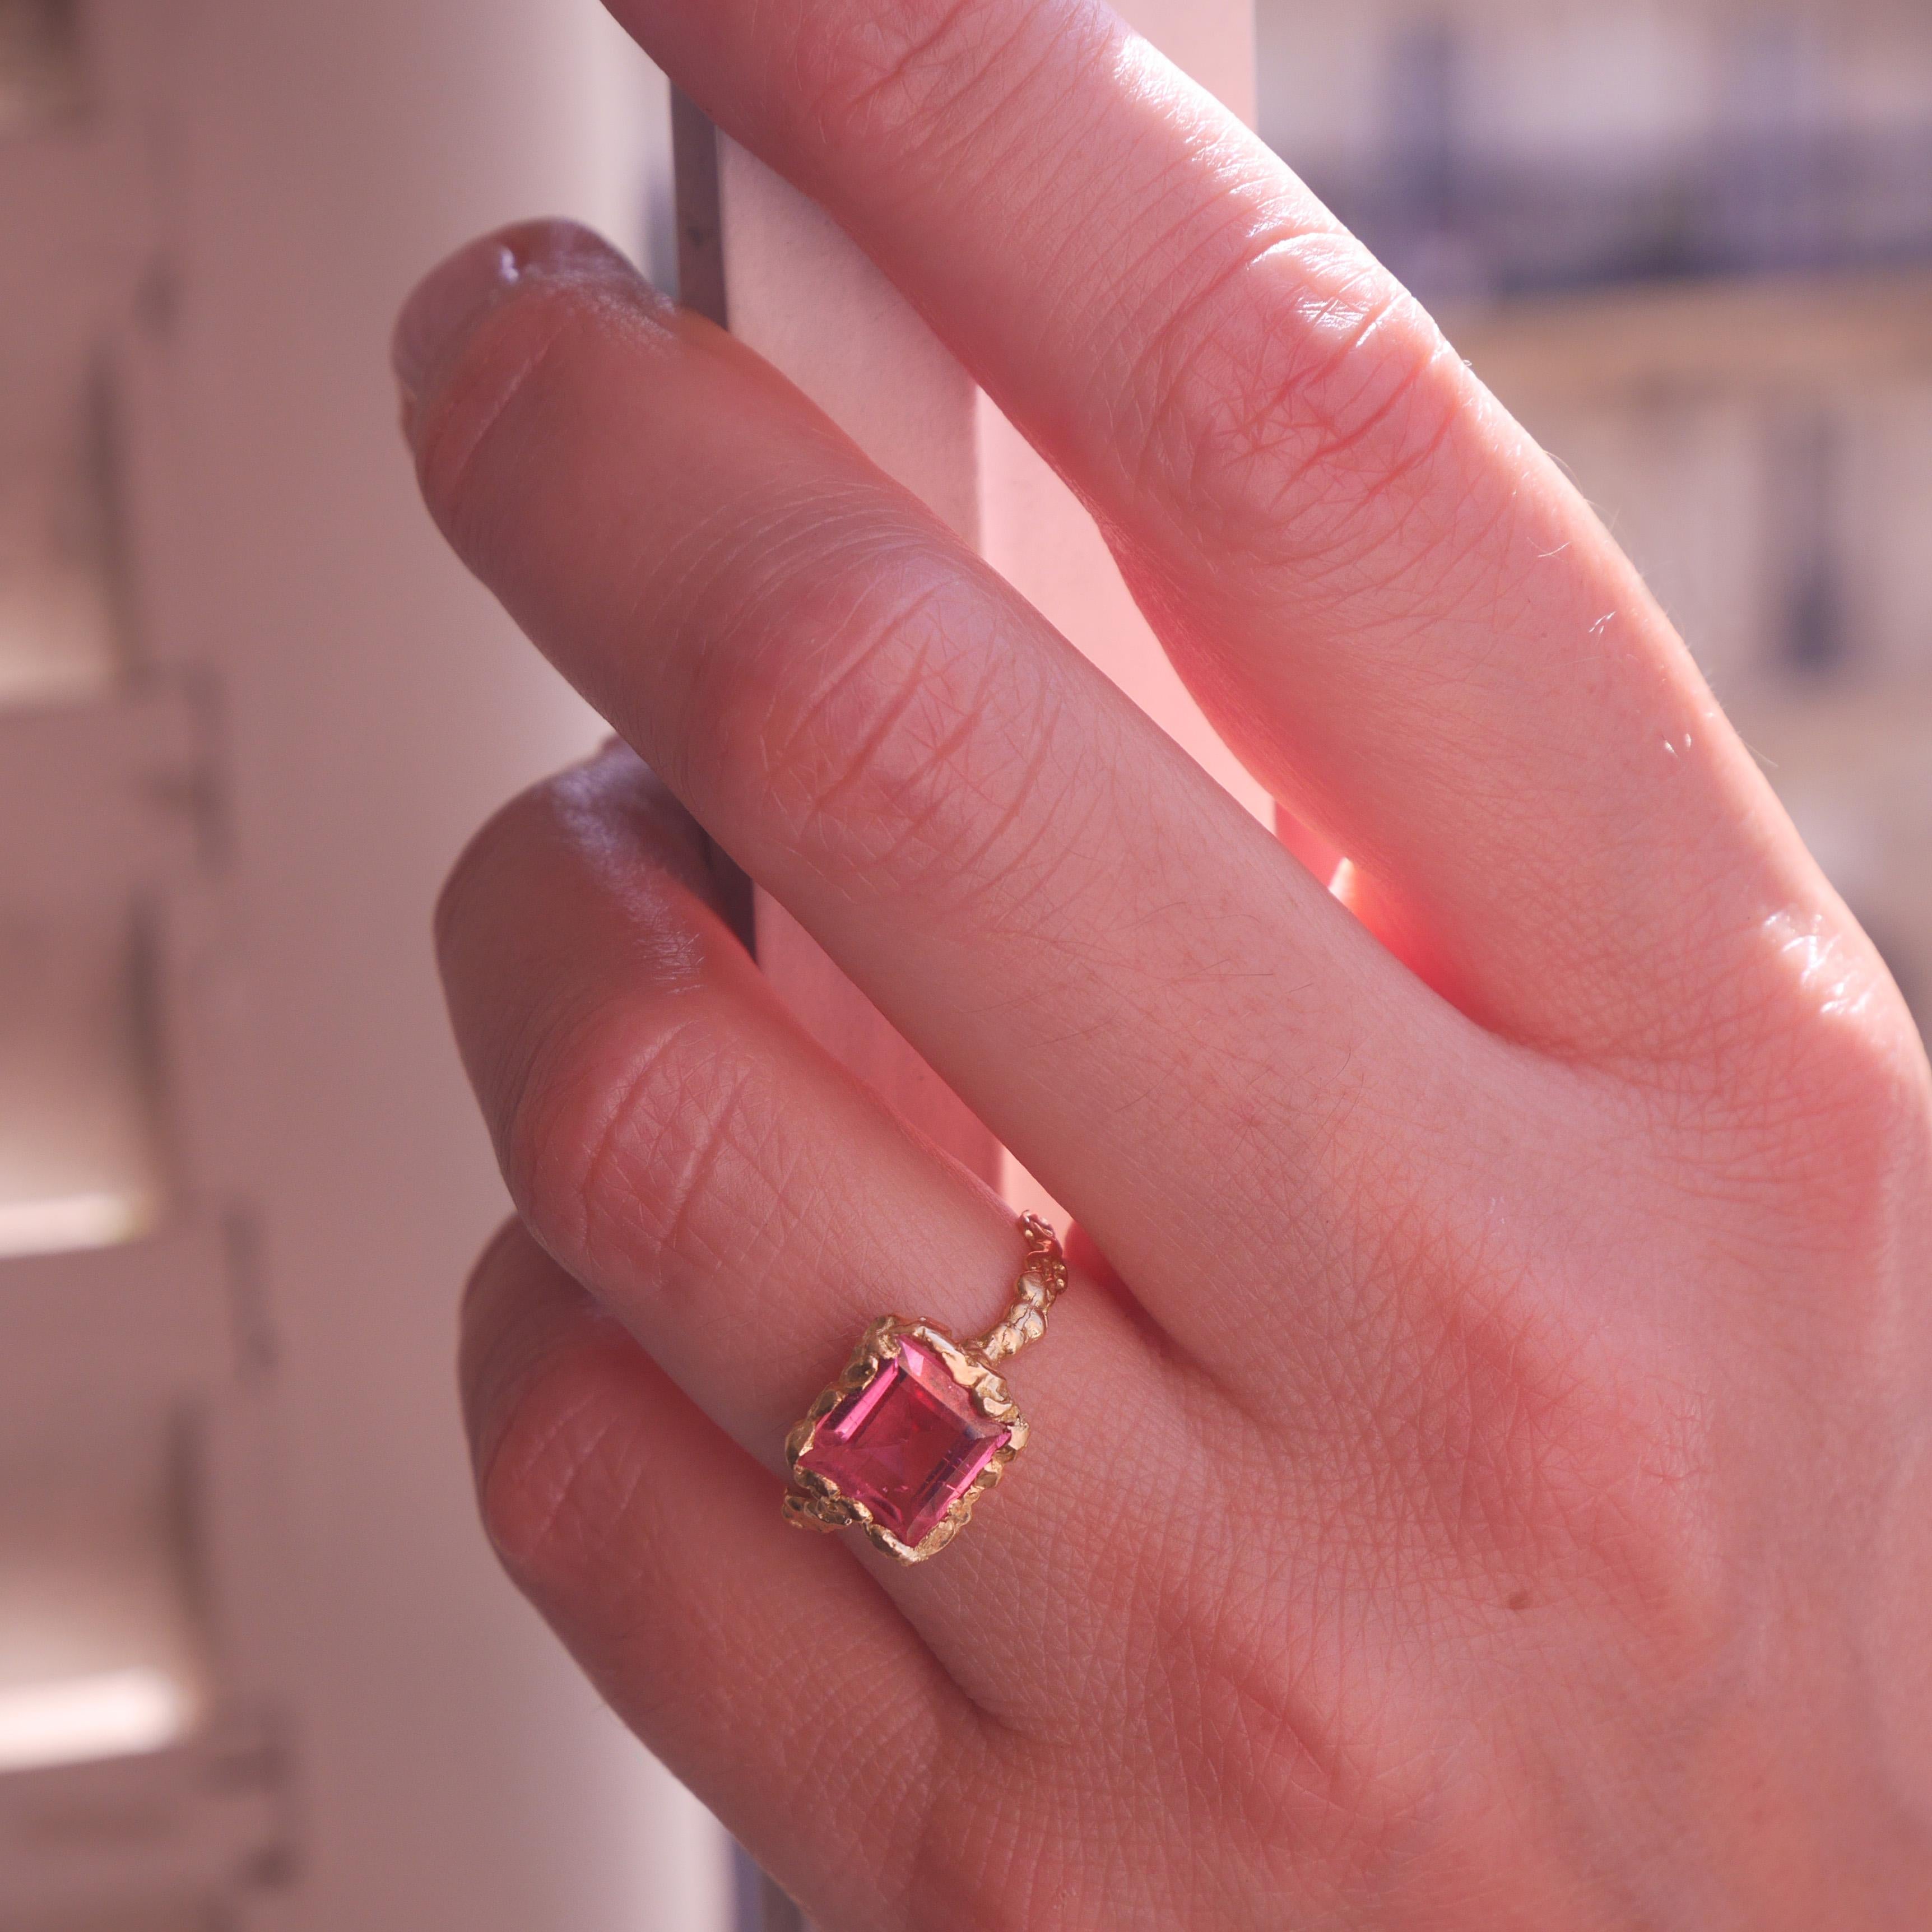 This ring is meticulously sculptured and cast from 18 Karat yellow gold and its weight is approximately 3 grams.
It is set with a 2.5 carat approx pink tourmaline.
French size 52  / 5.5 US size.
It can be made to size on request.
The craftsmanship